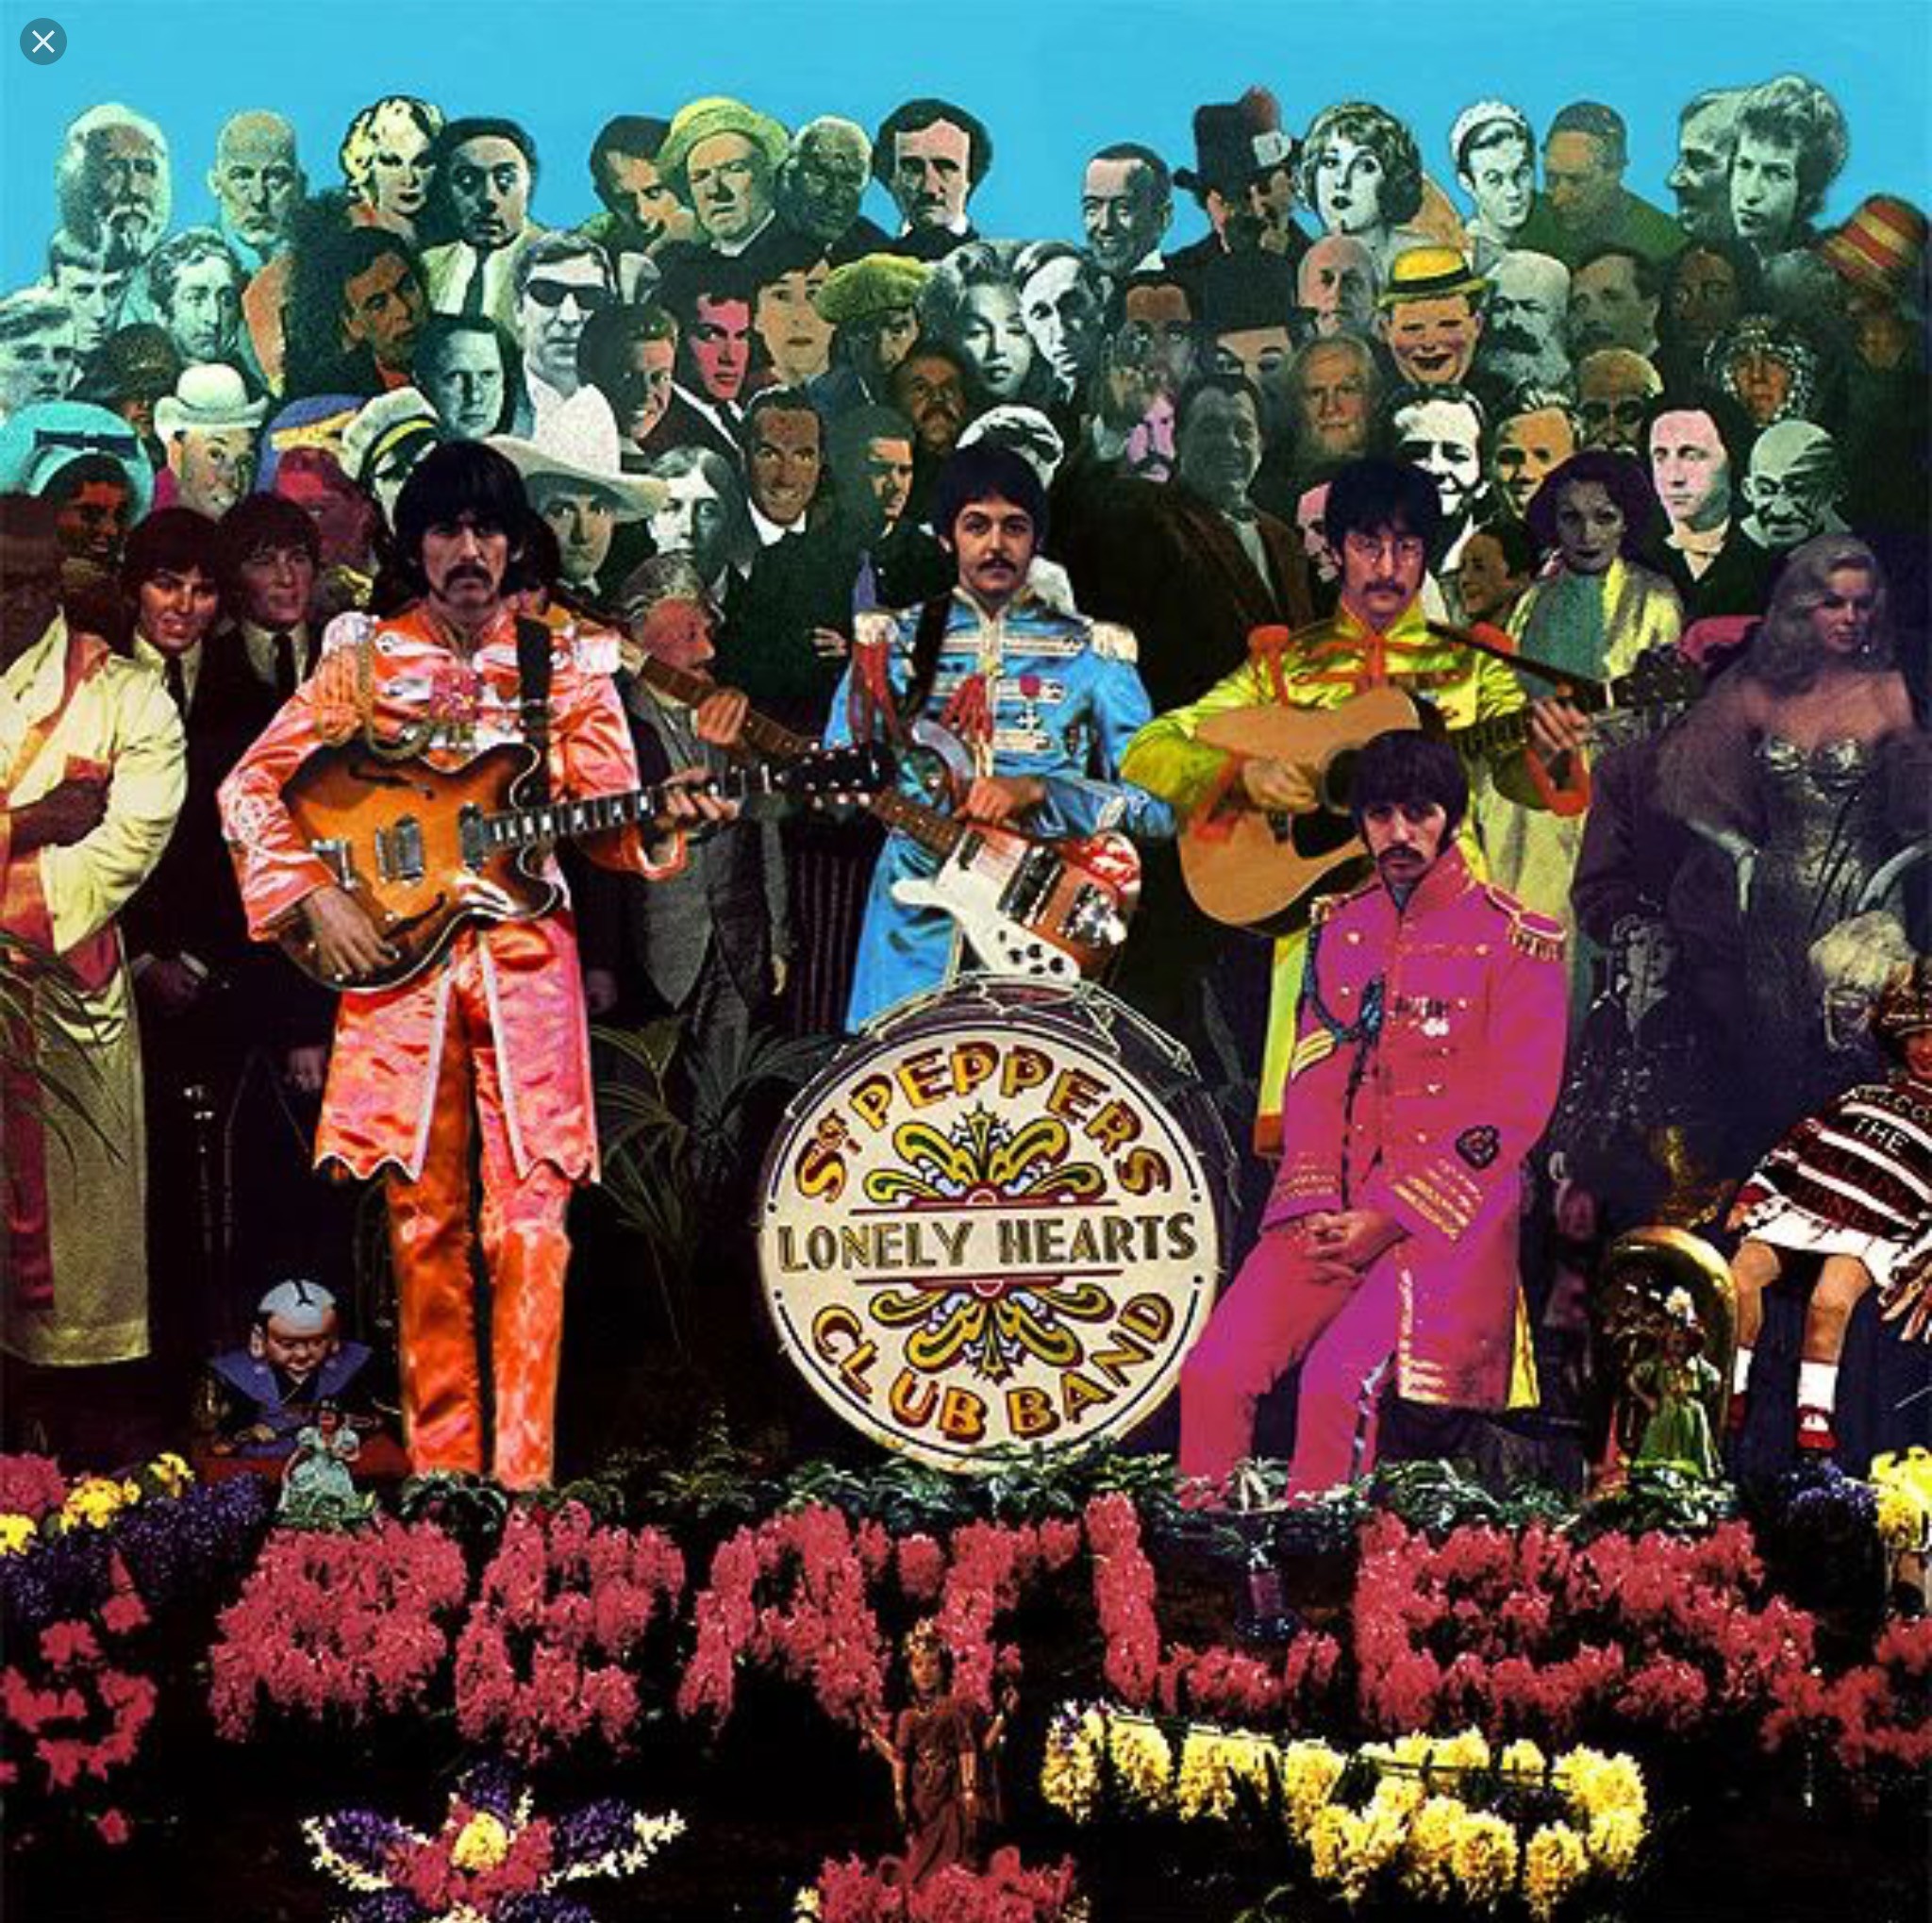 Beatles sgt peppers lonely hearts club. The Beatles сержант Пеппер. Обложка Битлз сержант Пеппер. The Beatles Sgt. Pepper's Lonely Hearts Club Band 1967. Битлз Sgt Pepper s Lonely Hearts Club Band.